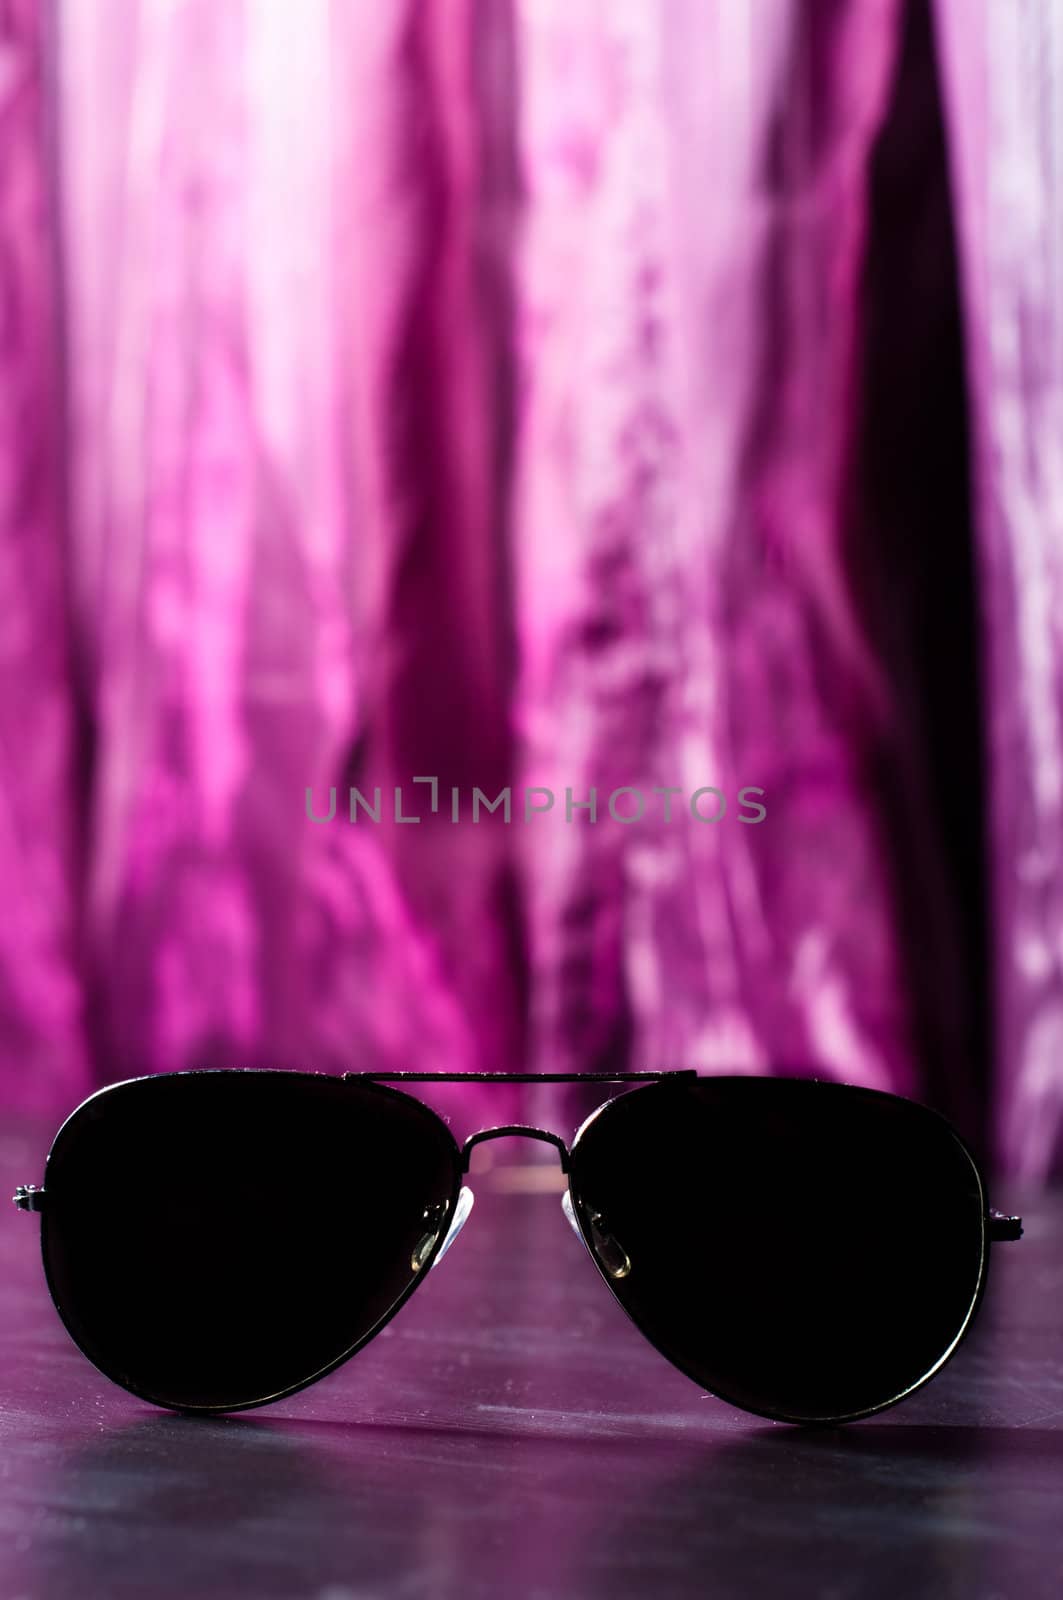 Sunglasses against purple blurry background by svedoliver